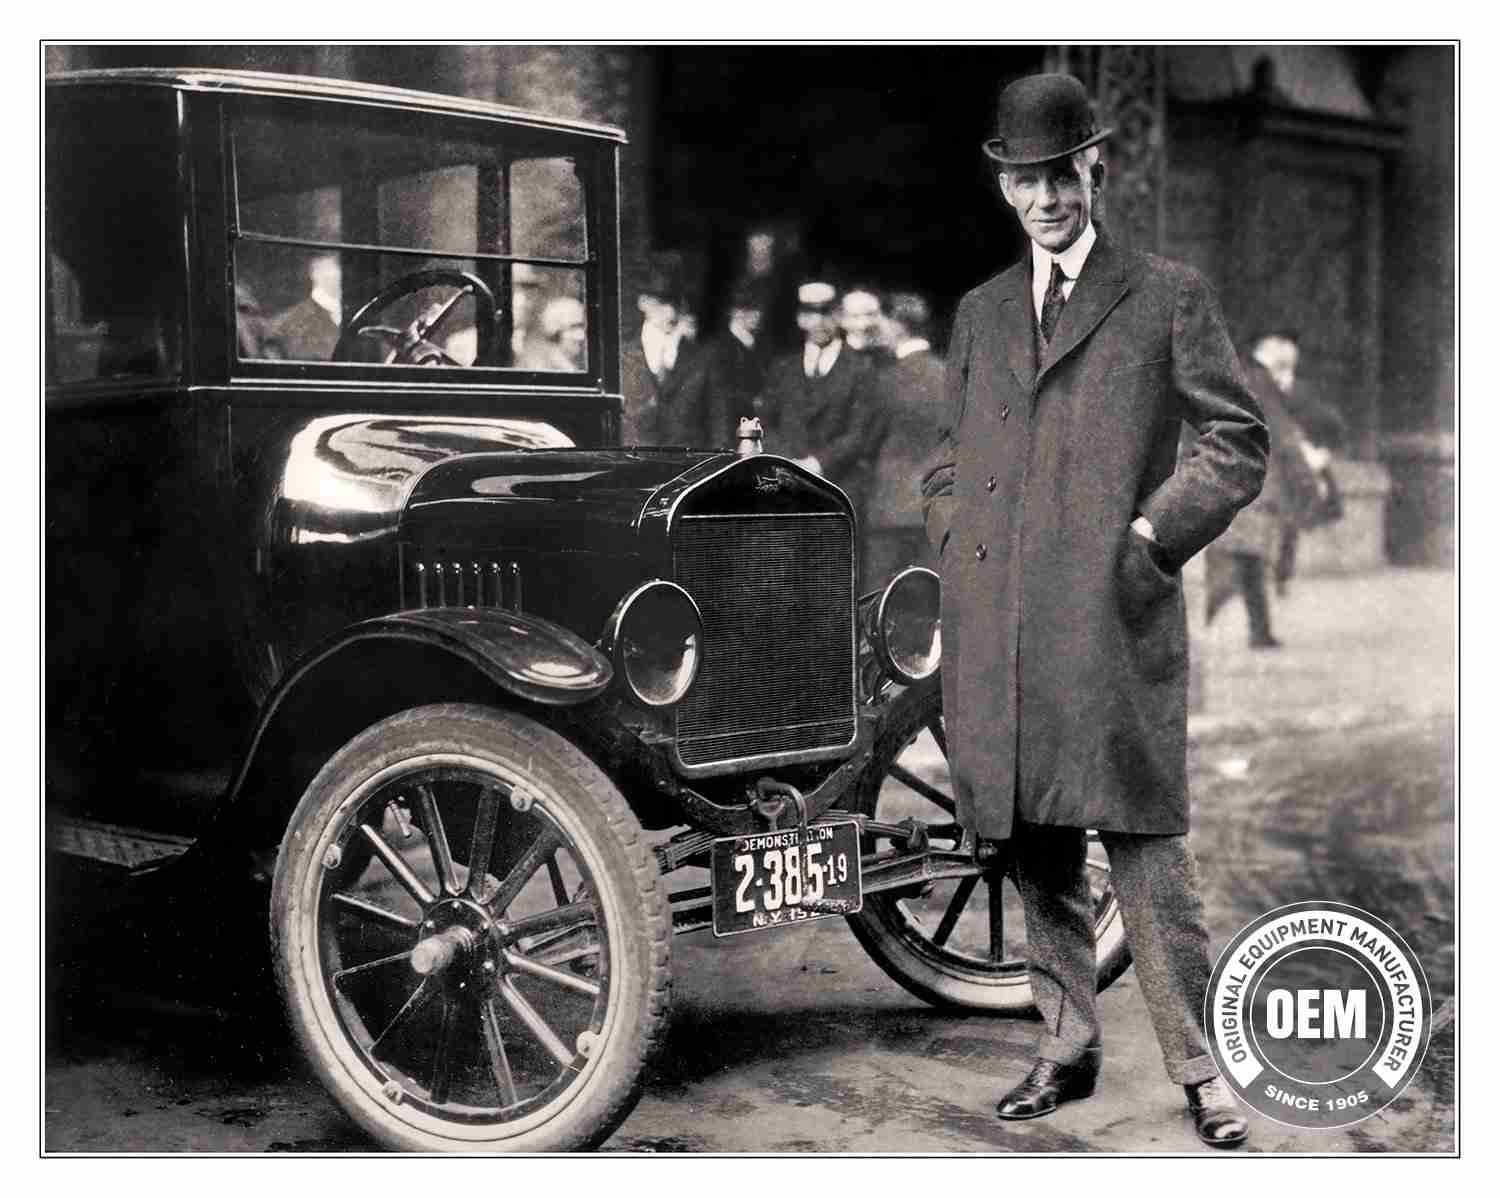 Henry Ford & Model T Motorcar 1921 Founder And Visionary With His Innovative And Iconic Ford Model T Motorcar In Buffalo, NY USA 1921 Henry Ford Was The Creative Force Behind An Industry Of Unprecedented Size And Wealth That In Only A Few Decades Permanen